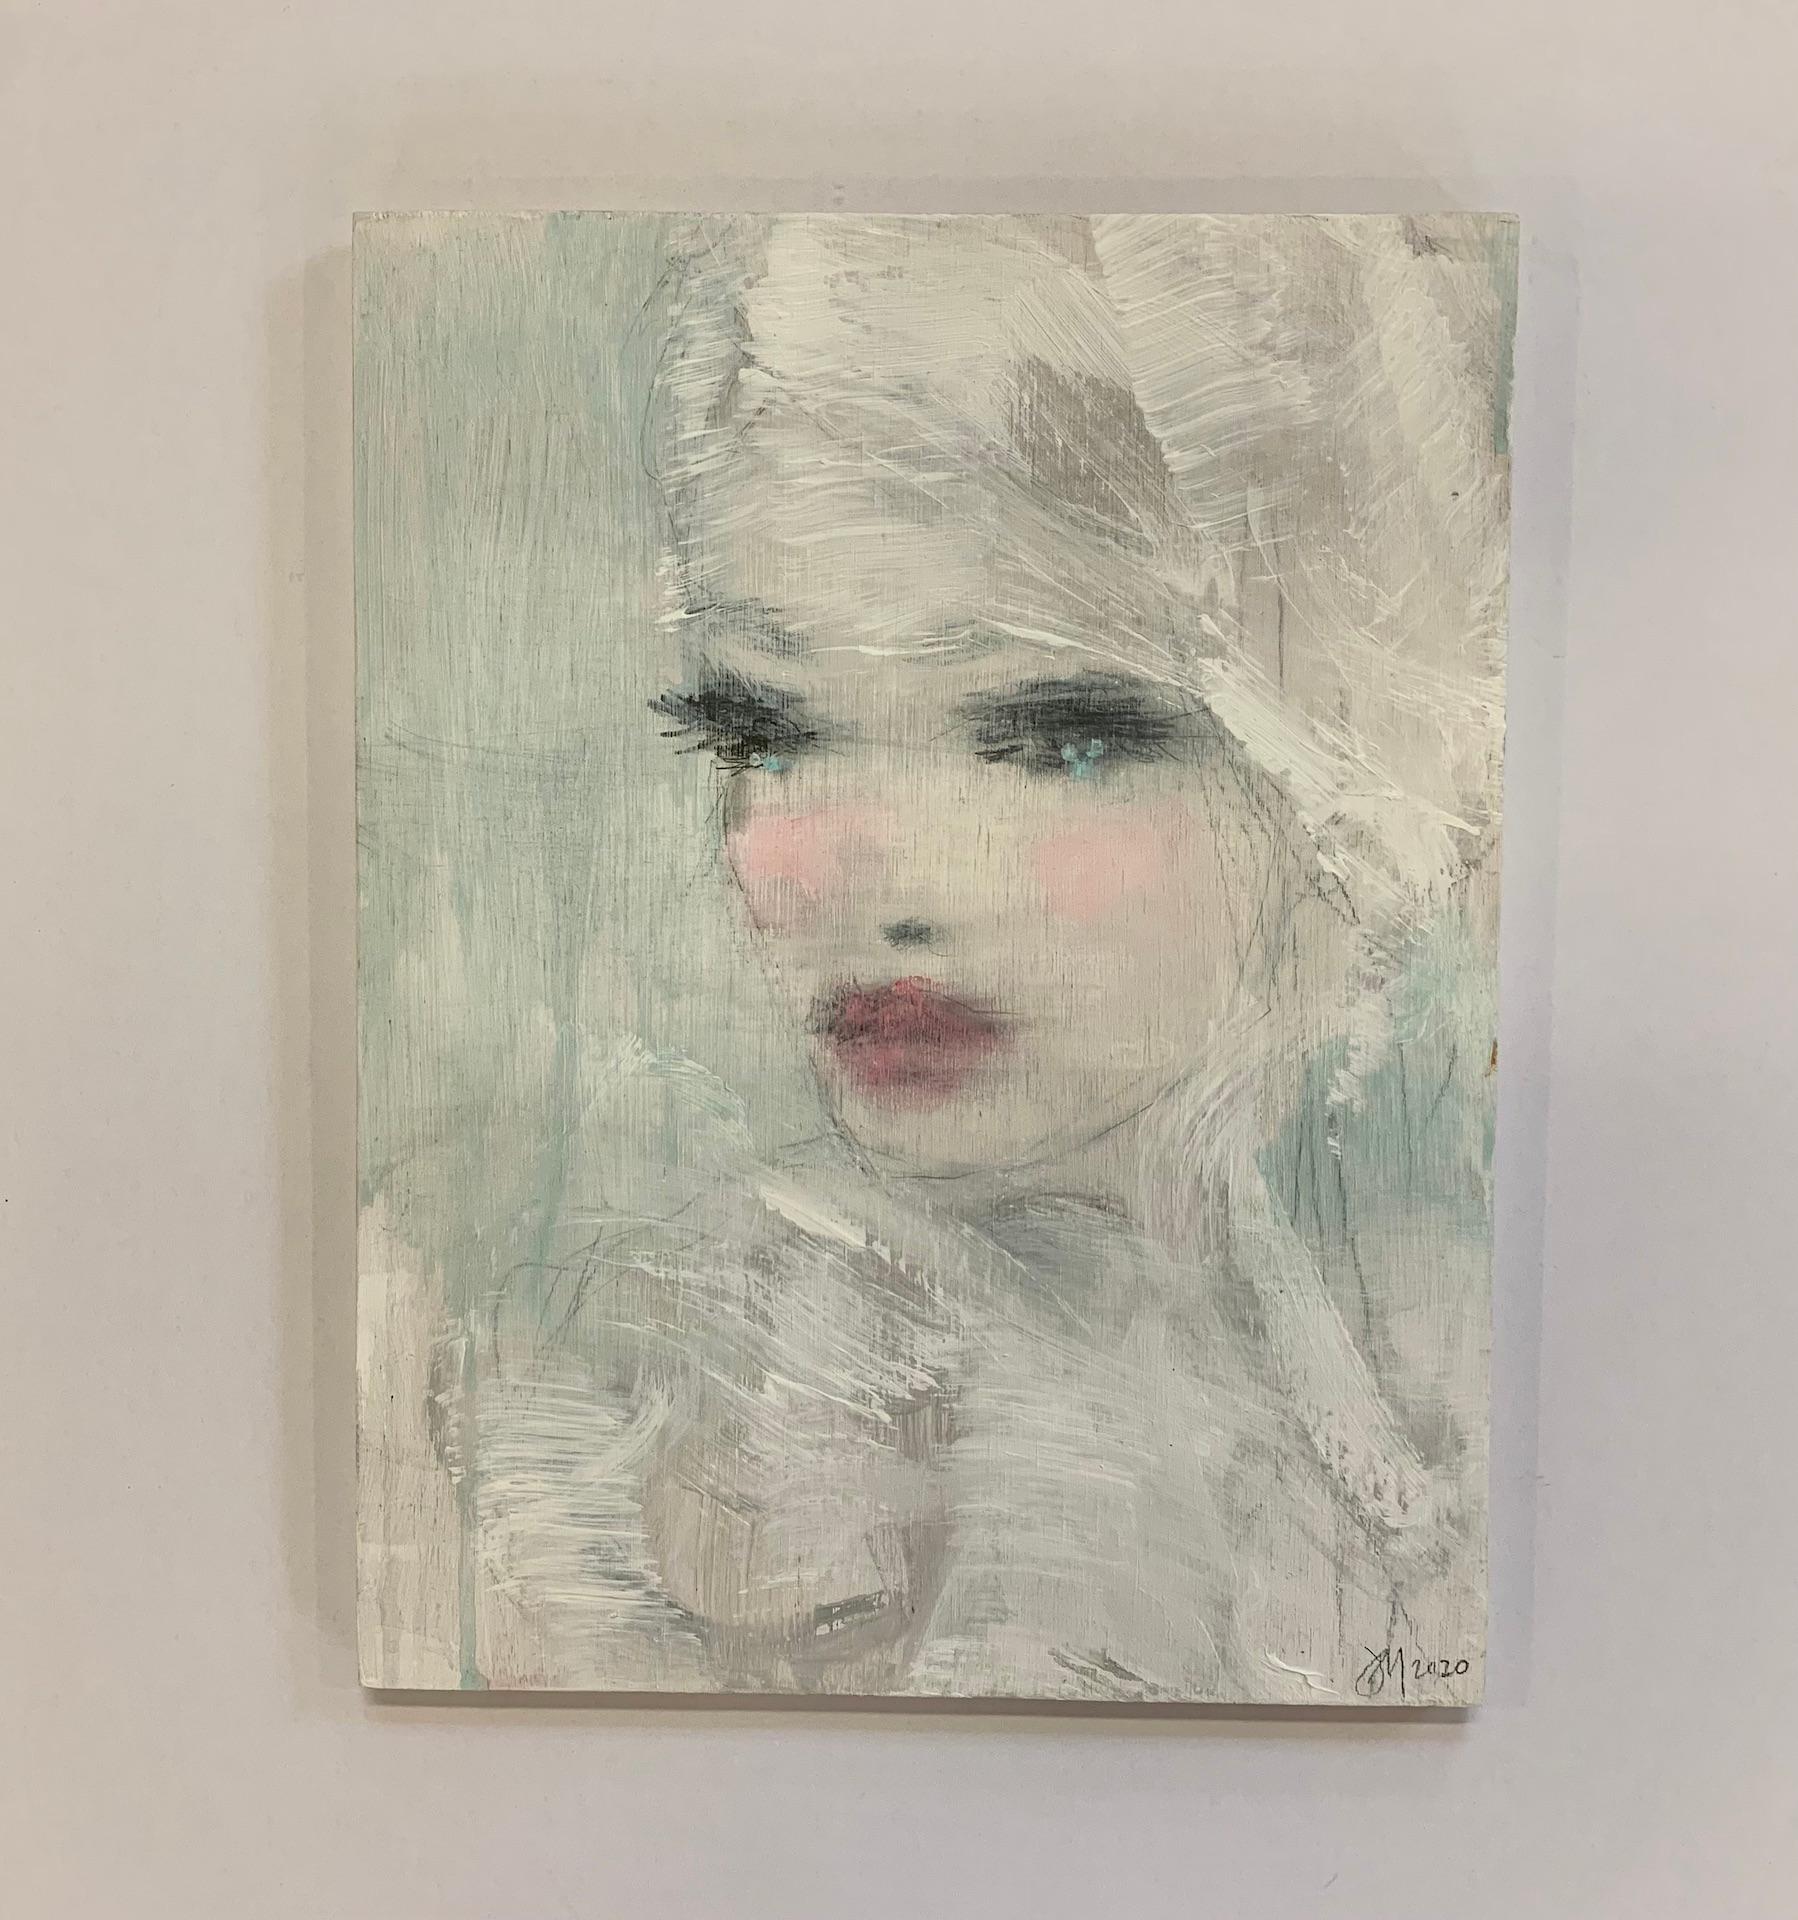 Lilac Eve and Vintage green Diptych - Gray Portrait Painting by Jorunn Mulen